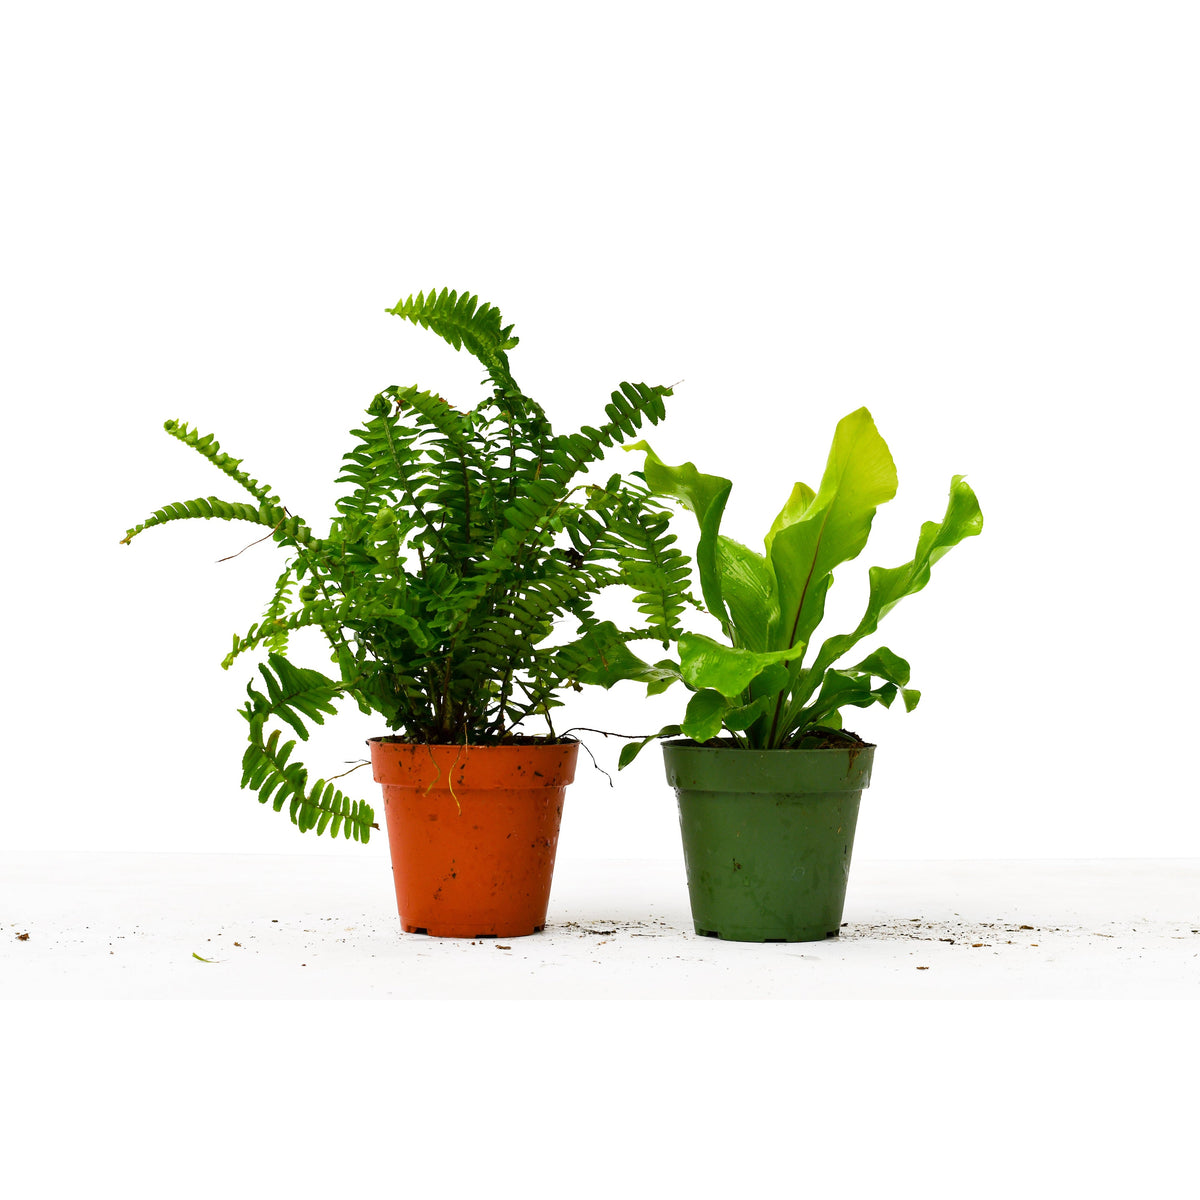 2 Fern Variety Pack - Live Plants - FREE Care Guide - 4" Pot - House Plant